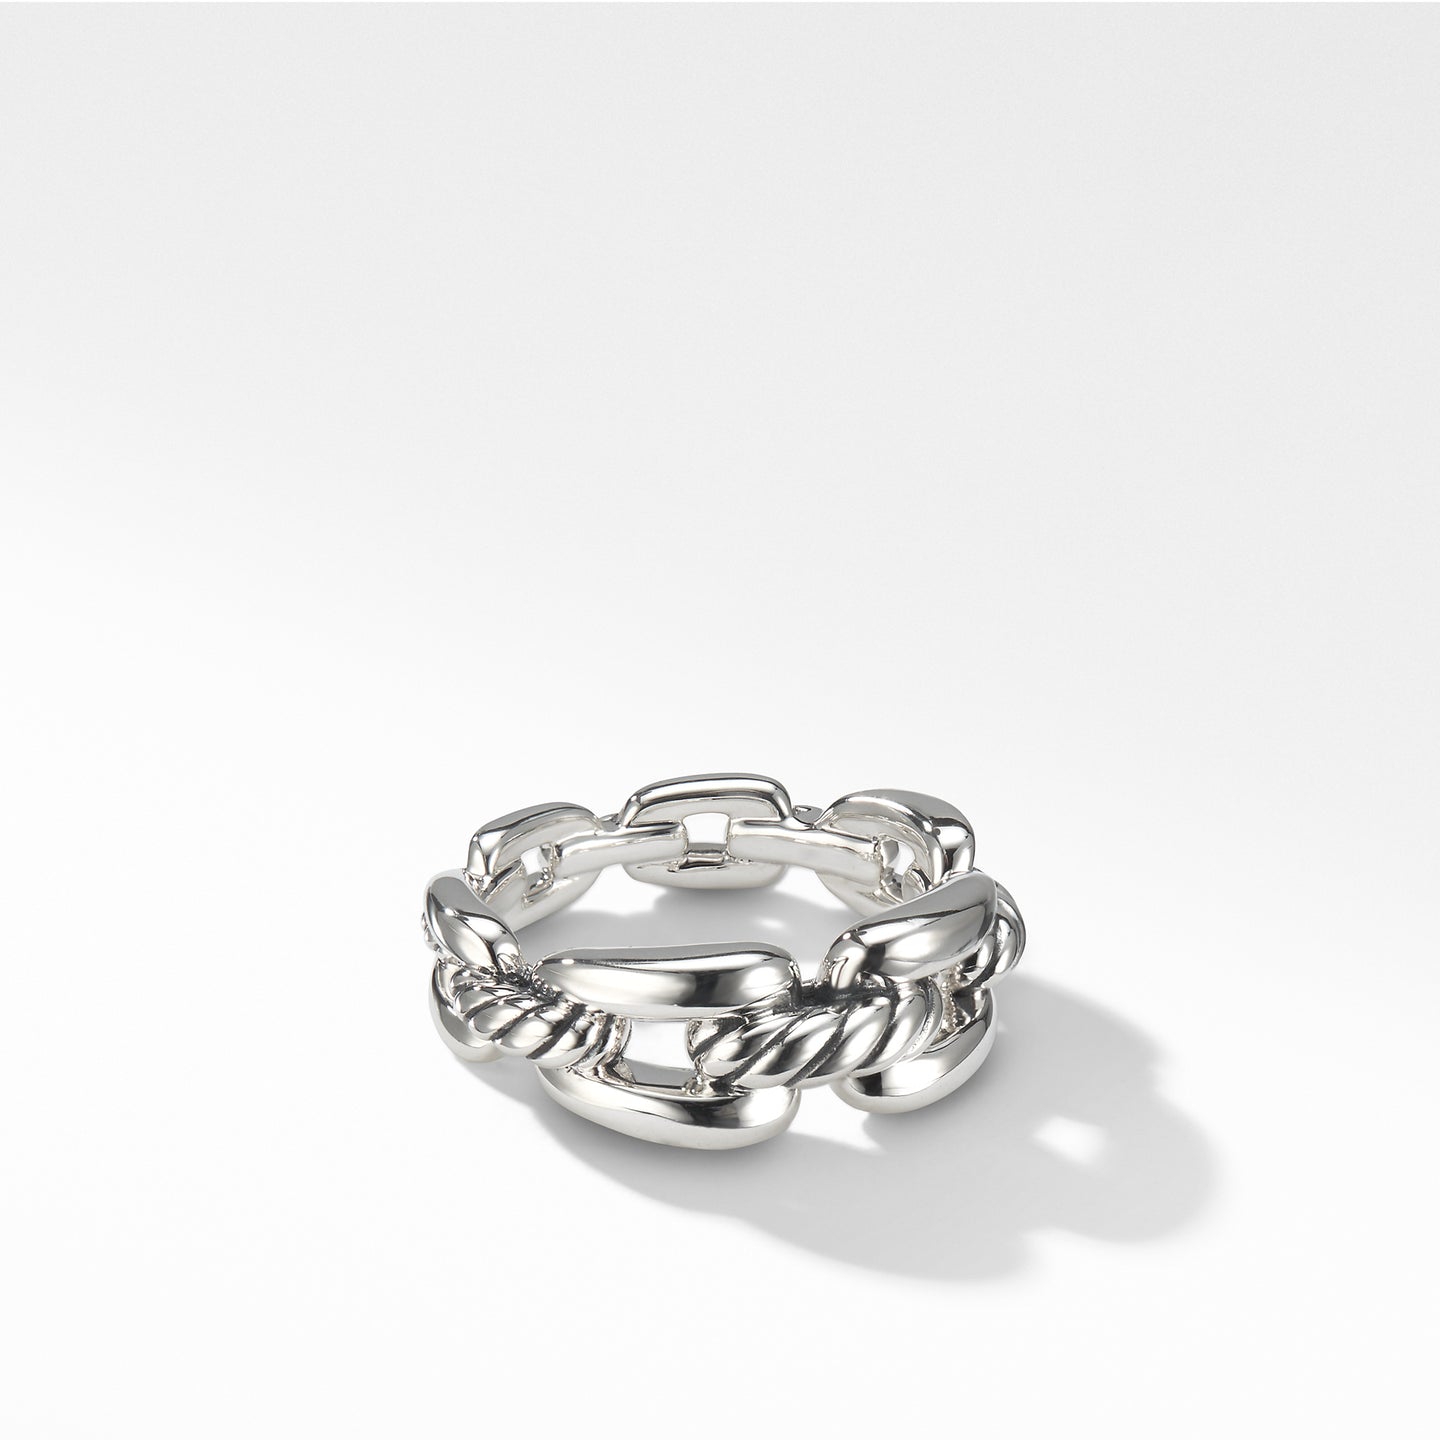 Wellesley Chain Link Ring, 8mm, Size 8